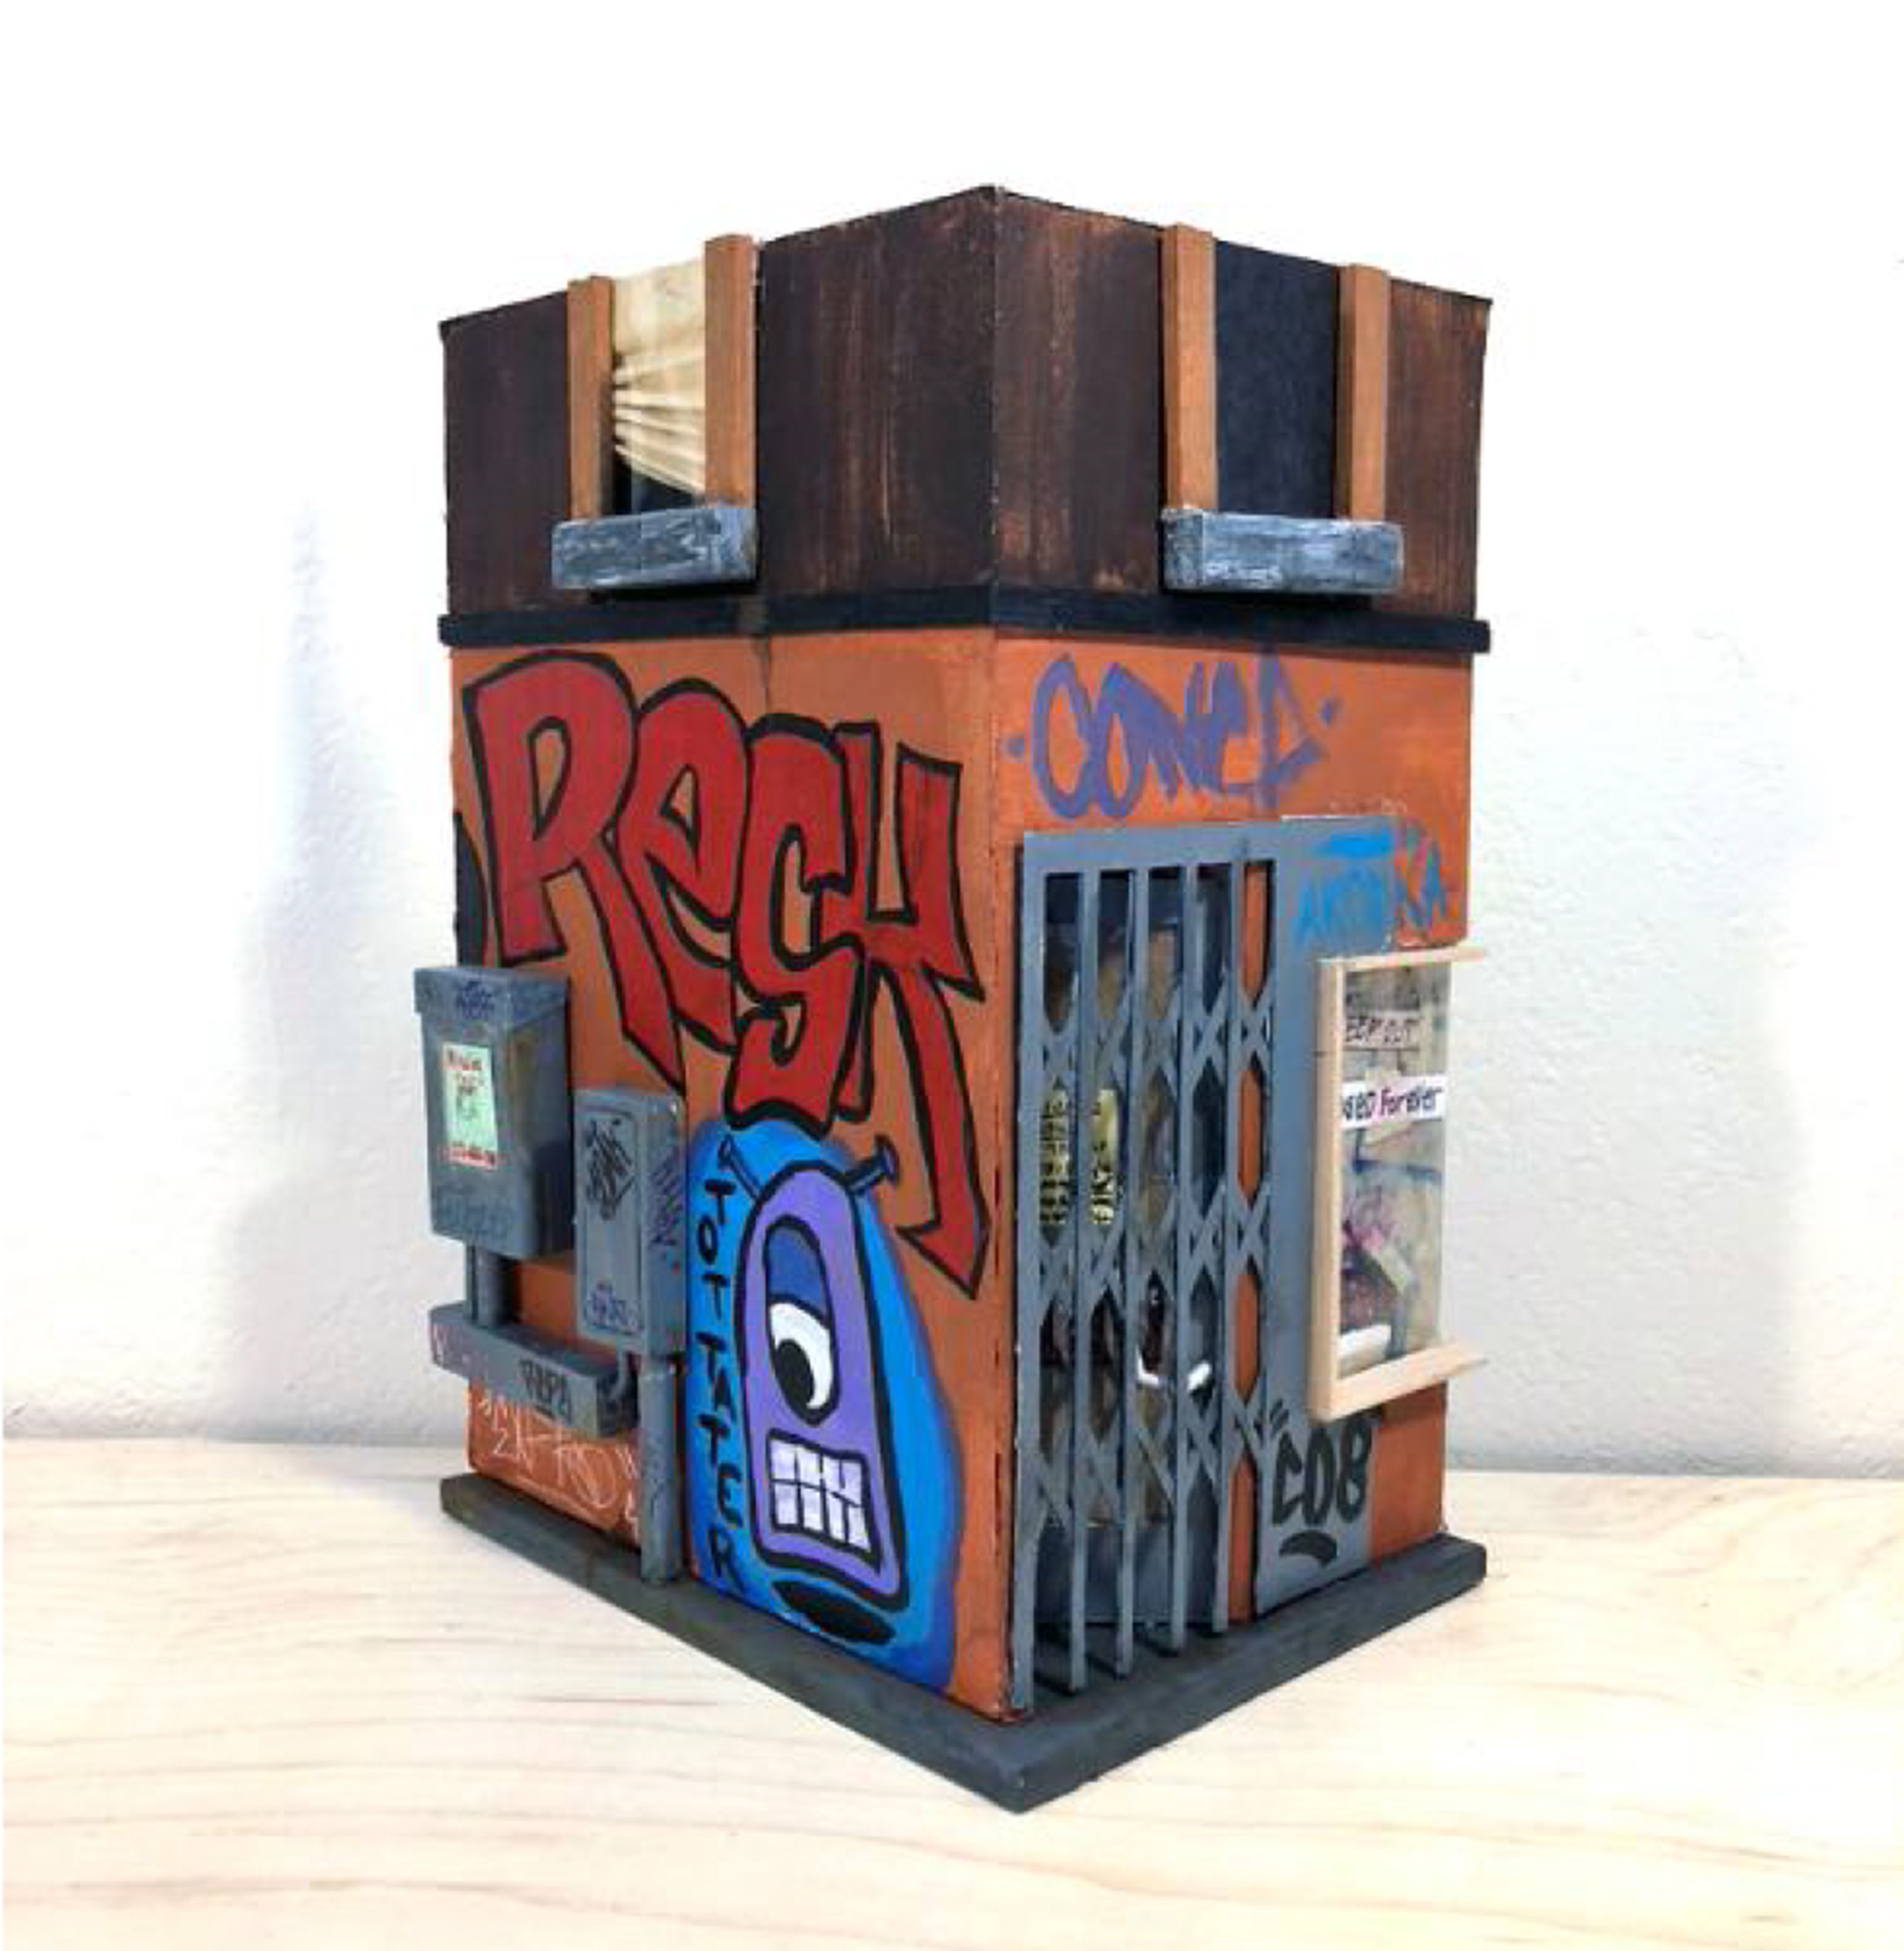 A miniature reproduction of a corner bodega with its security gate on and graffiti all over the building